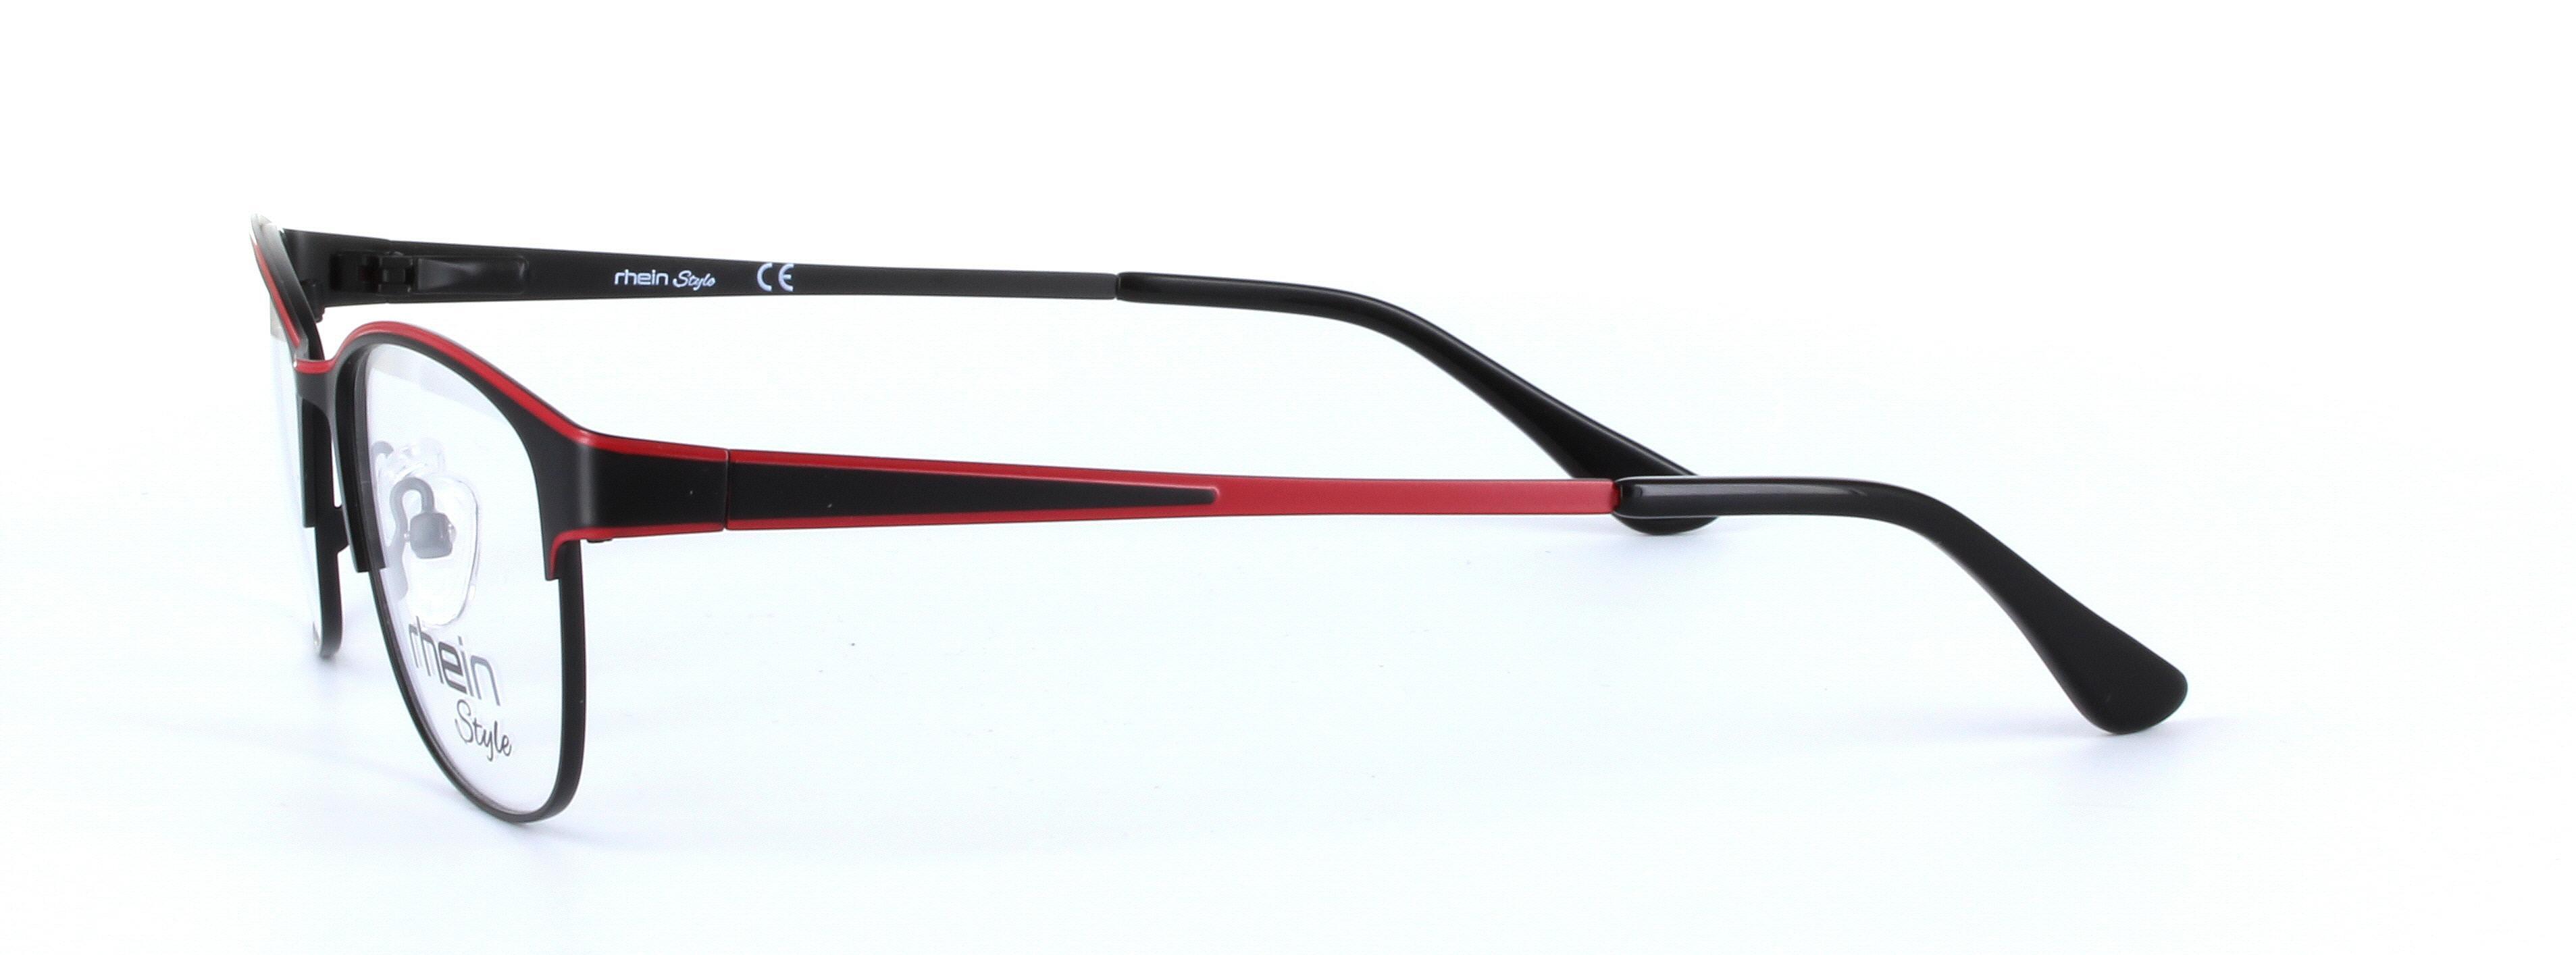 Harvey Black and Red Full Rim Oval Metal Glasses - Image View 2